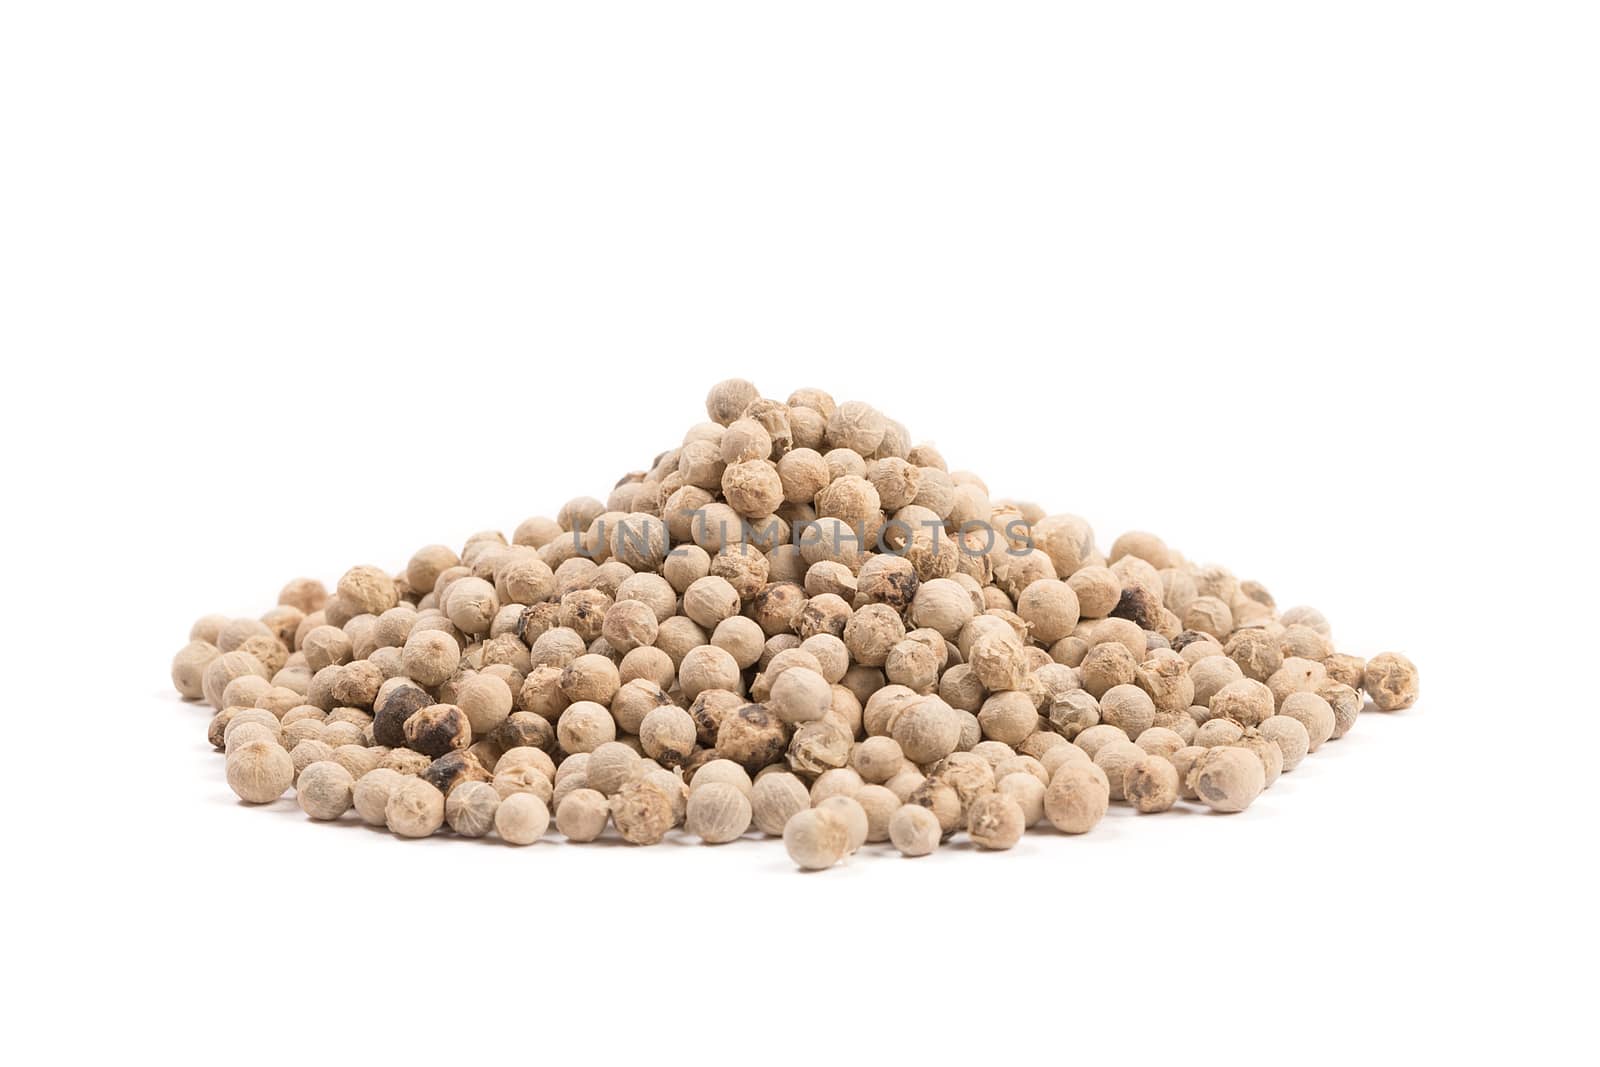 White pepper grains isolated on white background.